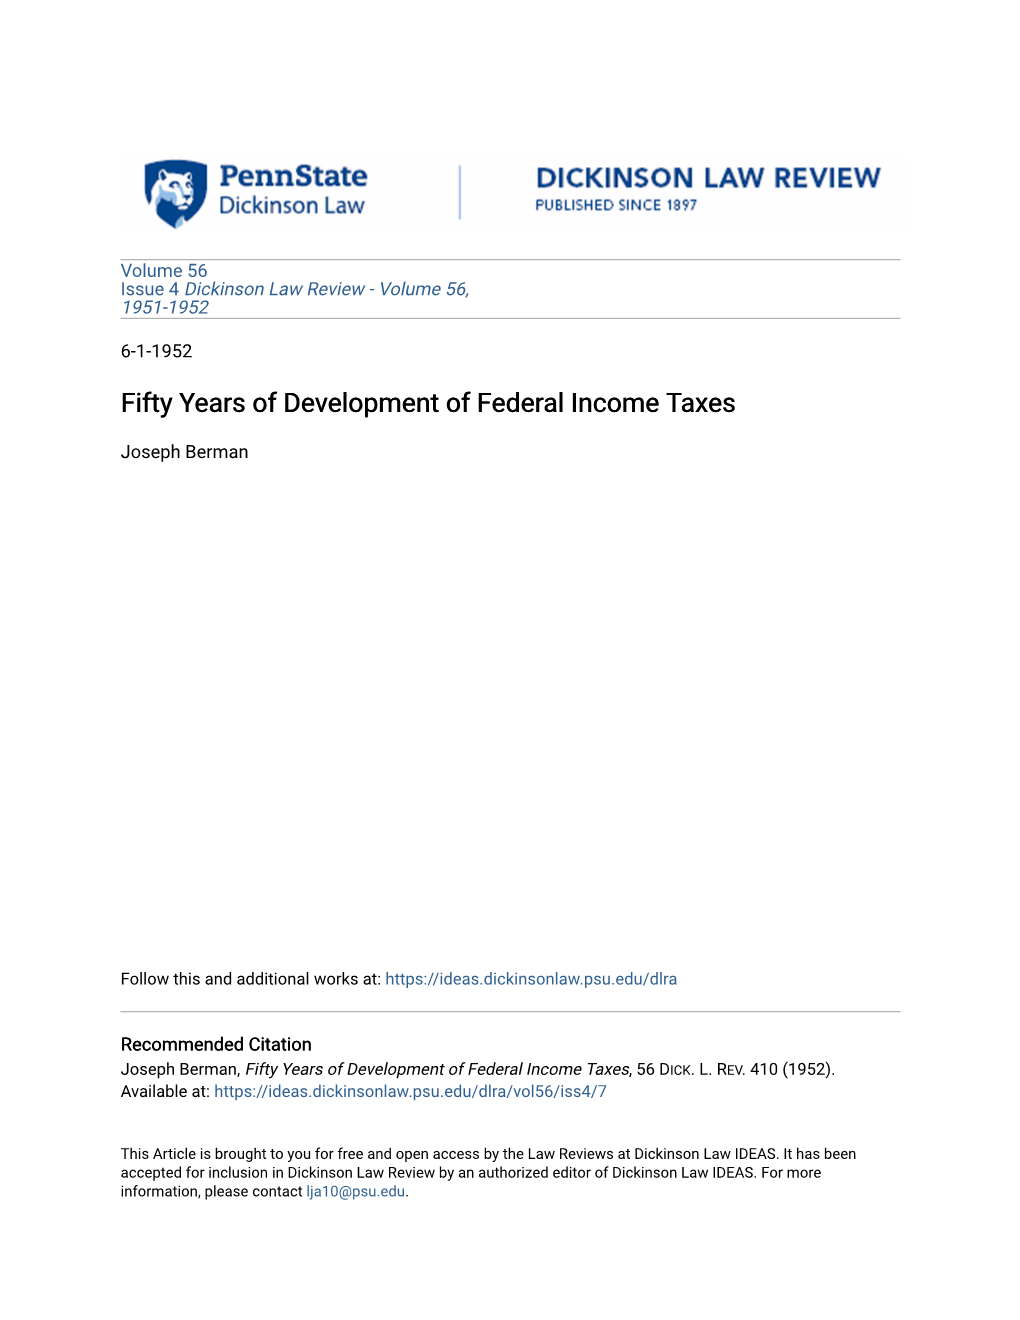 Fifty Years of Development of Federal Income Taxes